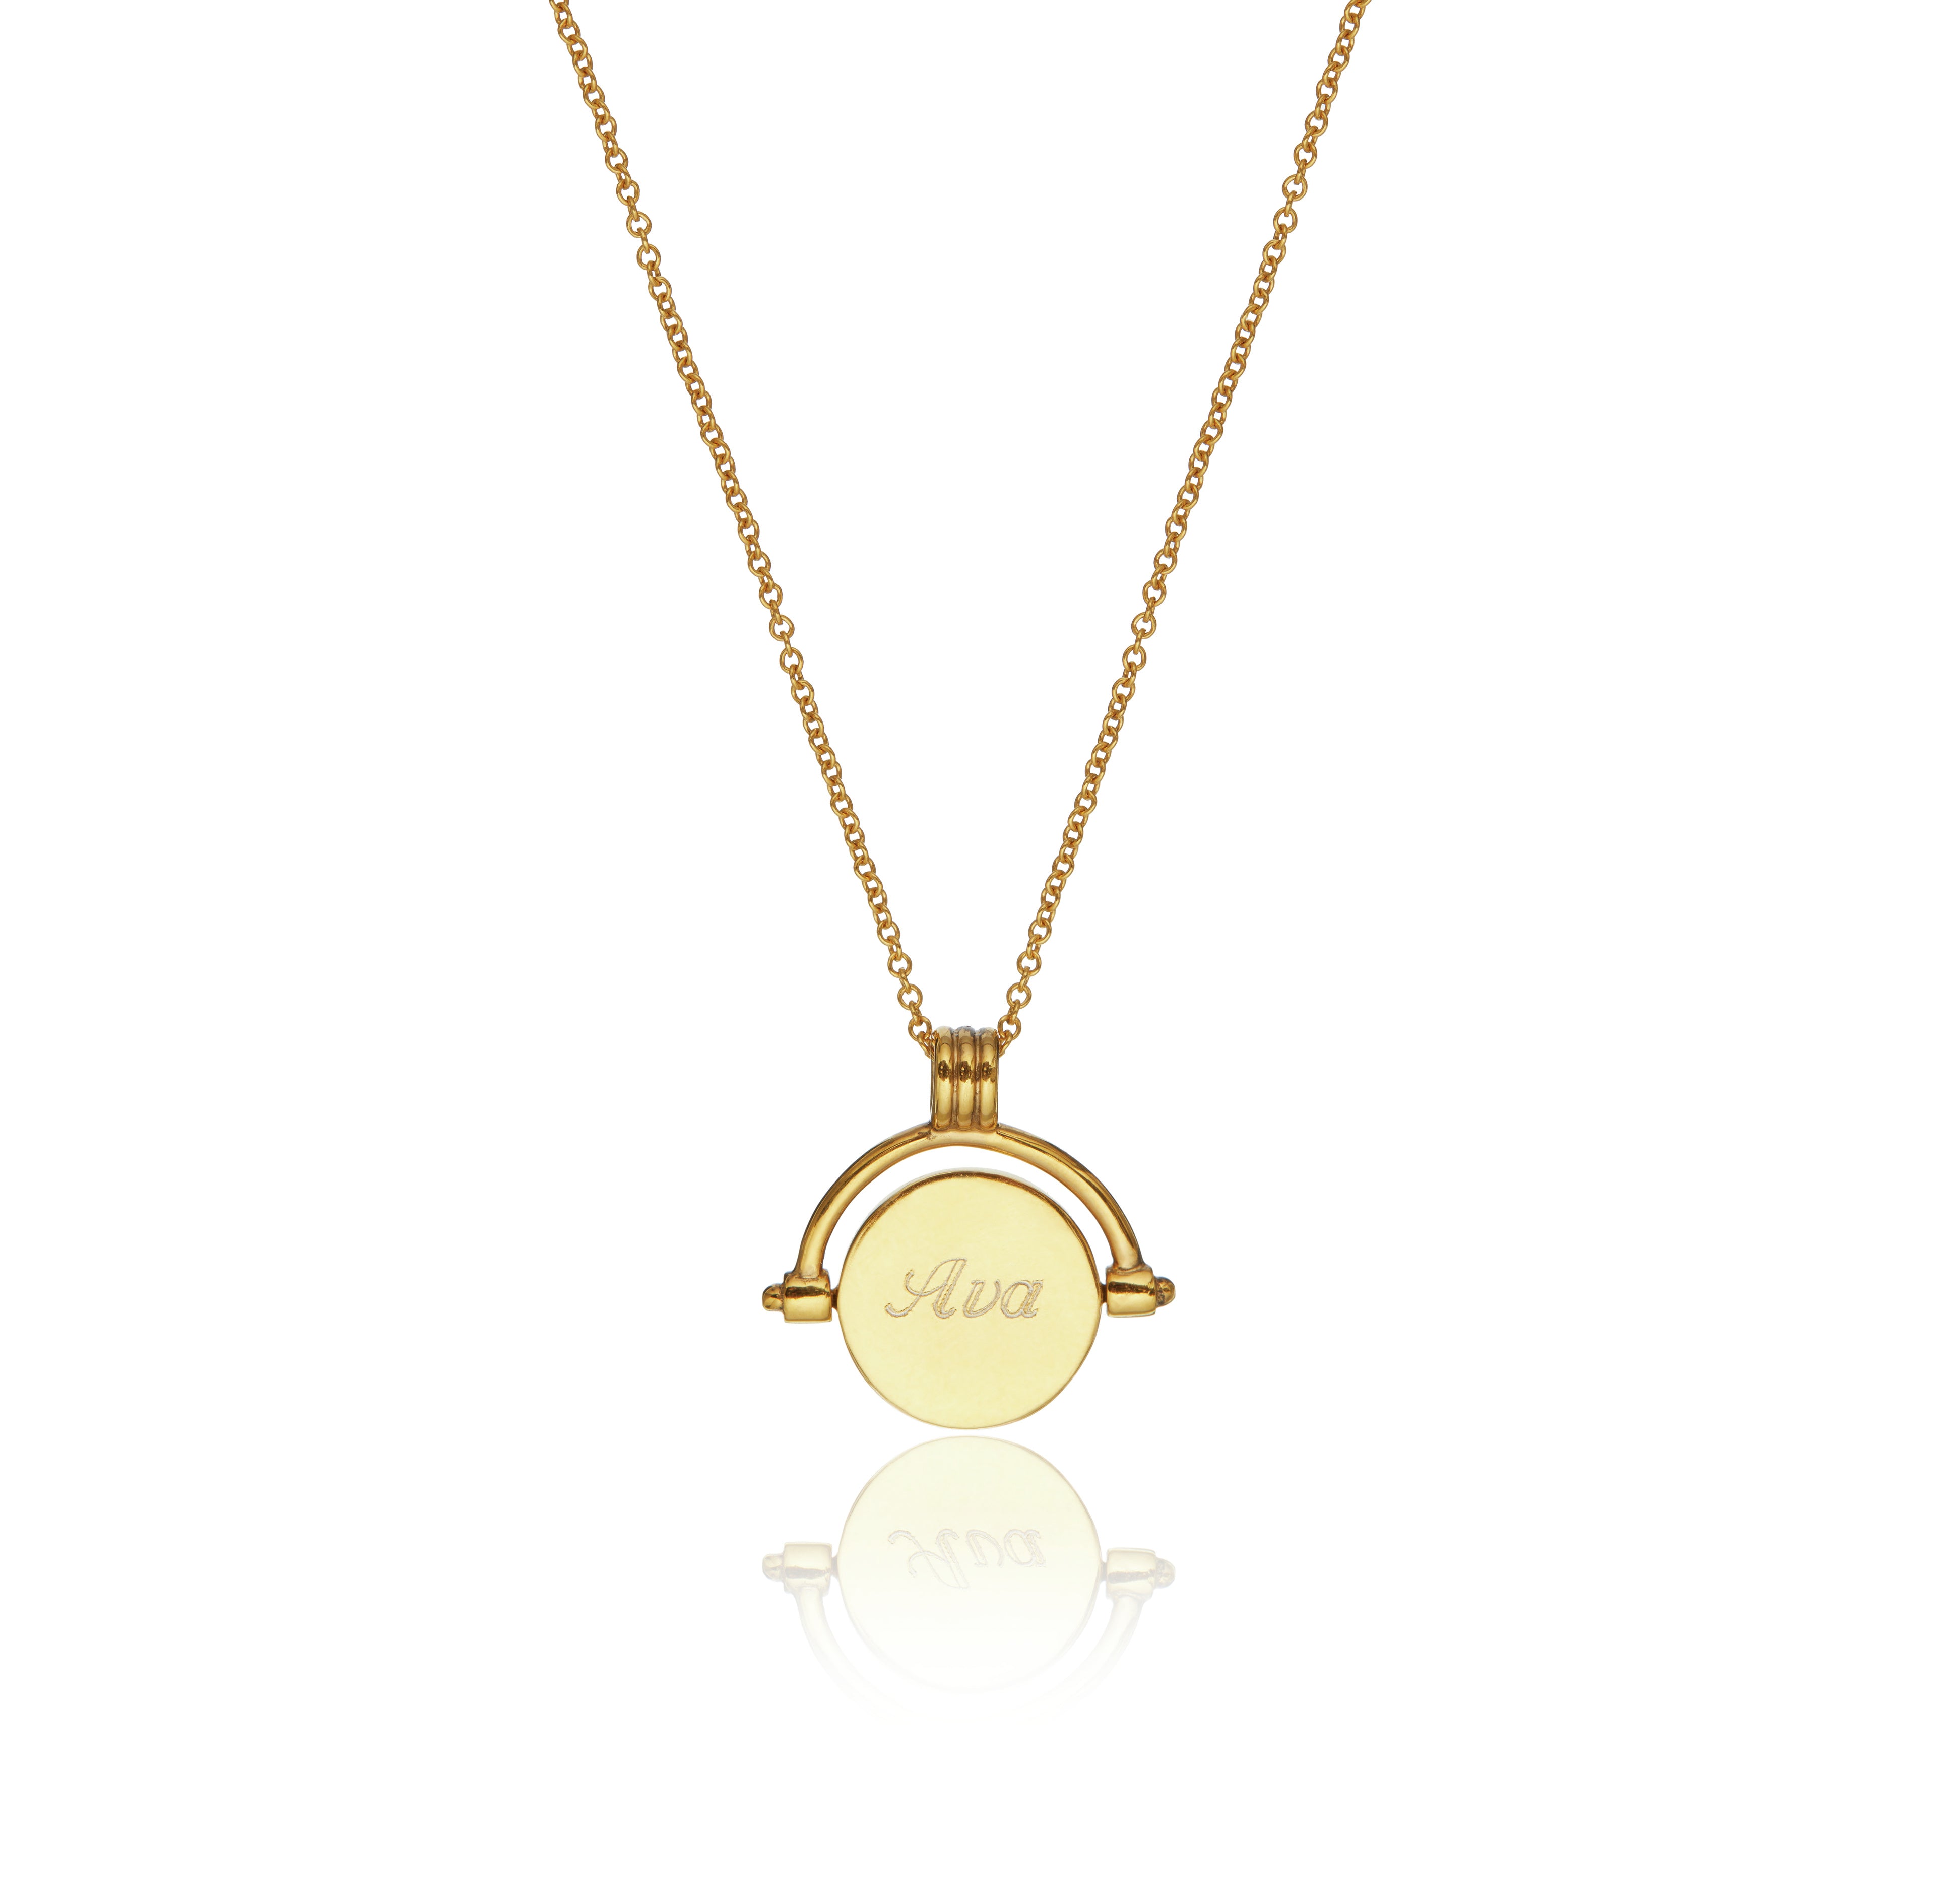 The back of the gold mother of pearl spinning disc necklace with Ava engraved on it on a white background